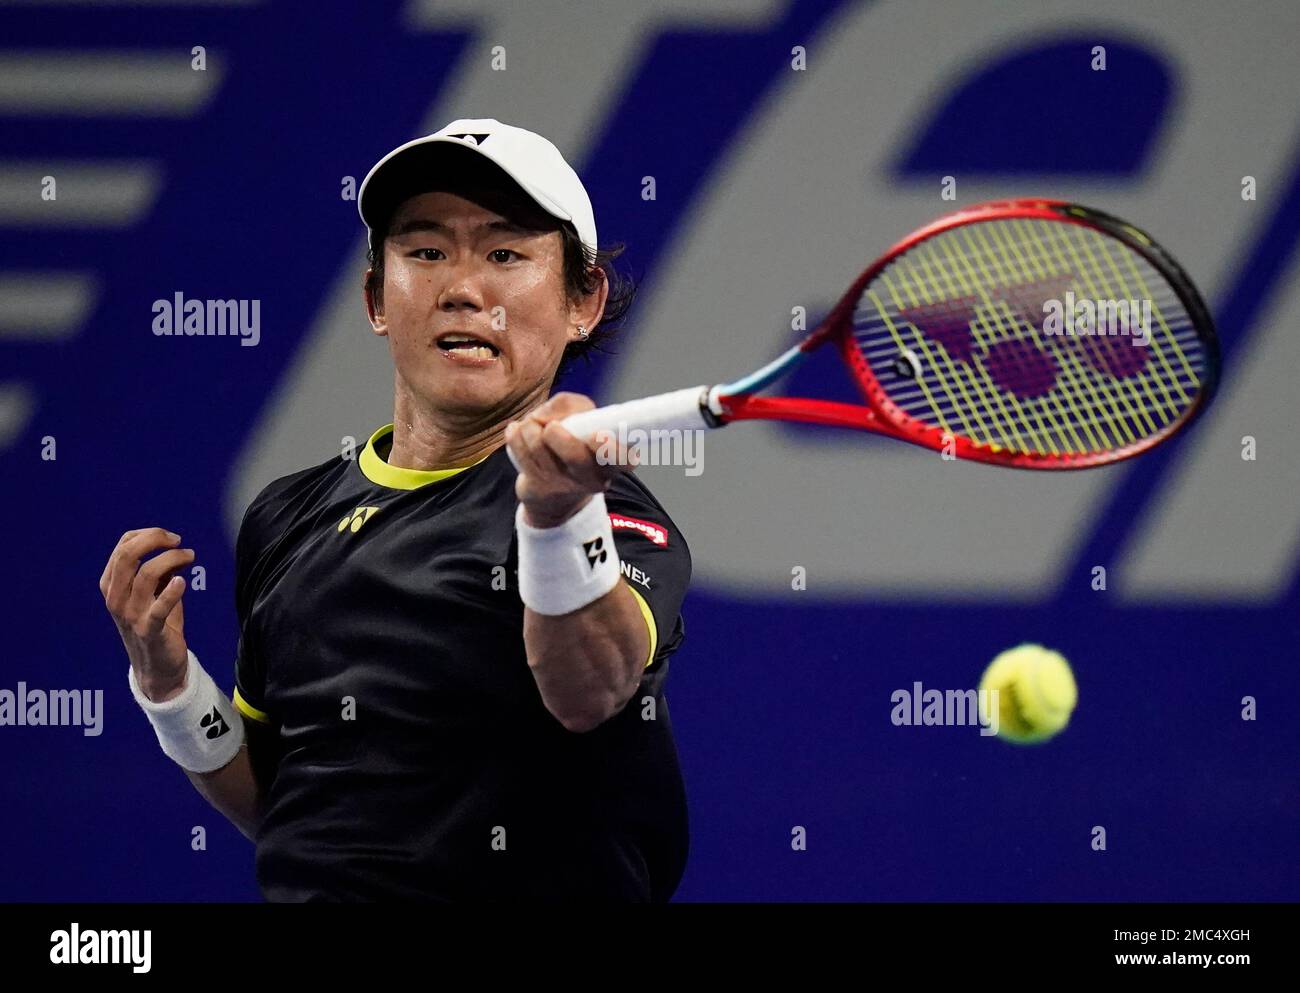 Yoshihito Nishioka, of Japan, hits a return to Taylor Fritz, of the United States, at the Mexican Open tennis tournament in Acapulco, Mexico, Wednesday, Feb